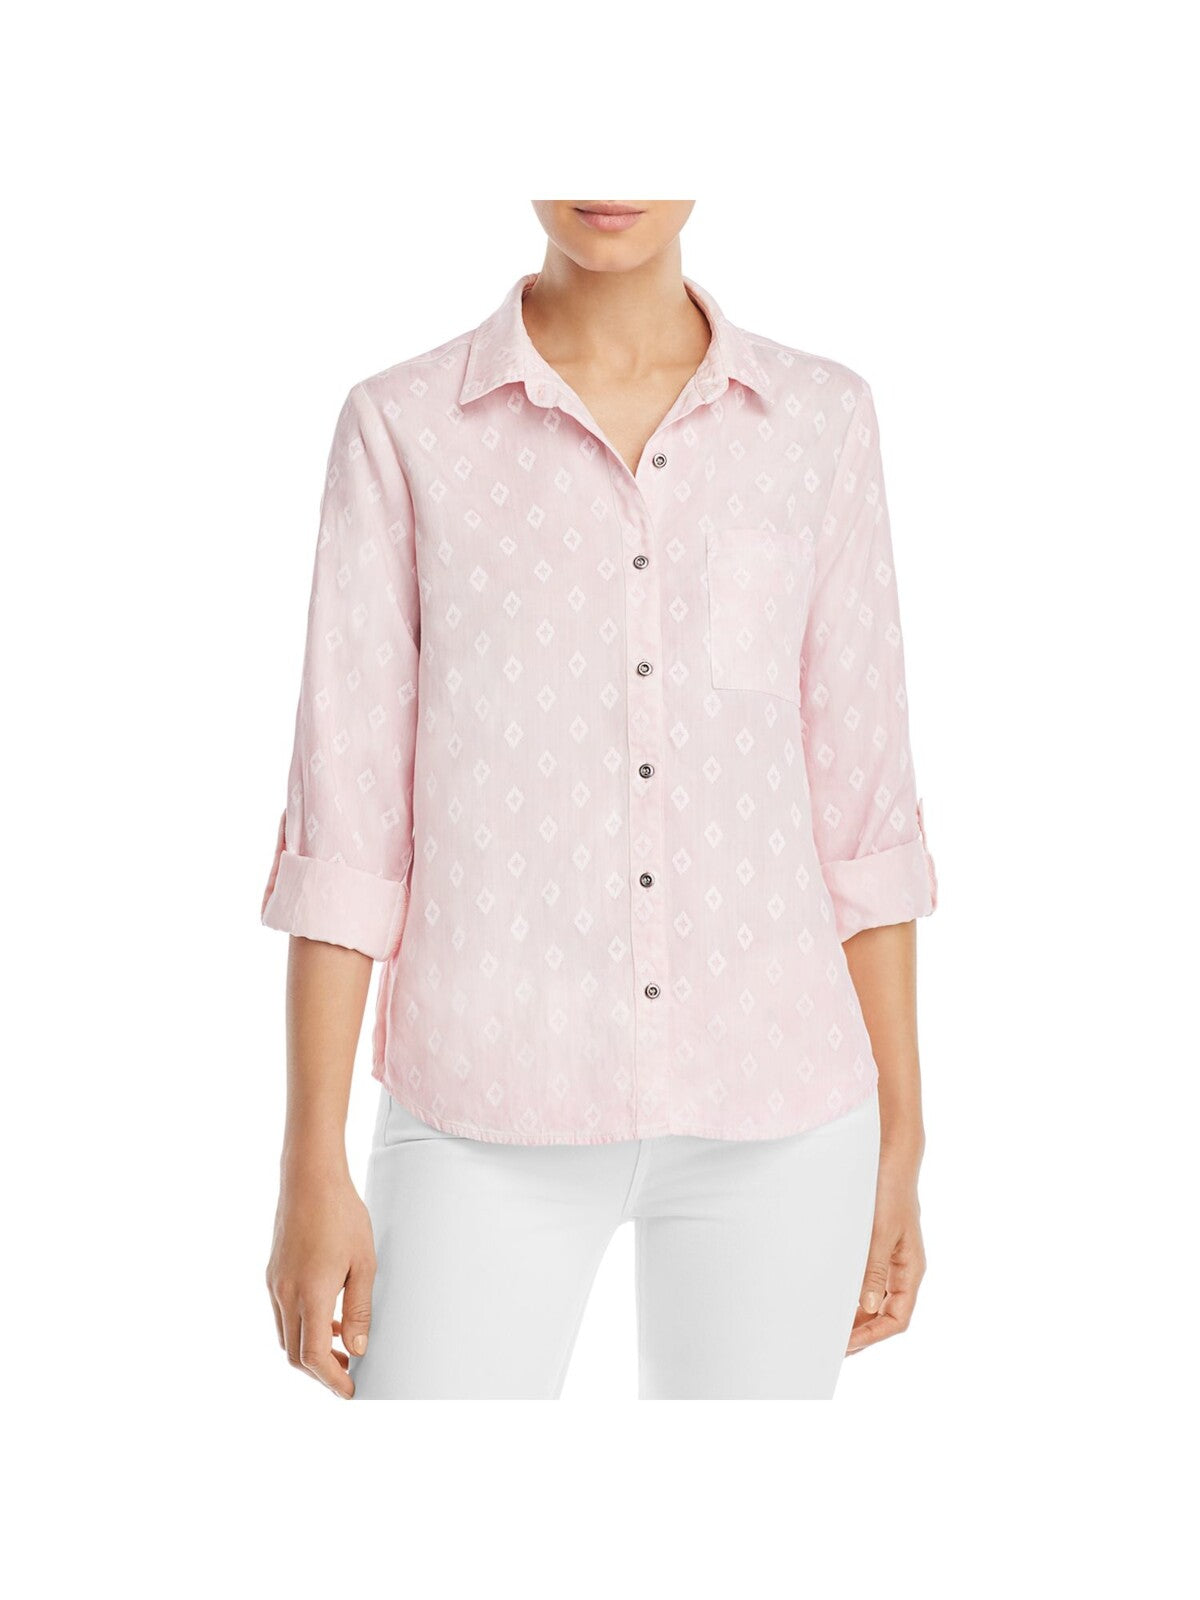 BILLY T Womens Pink Roll-tab Sleeve Collared Wear To Work Button Up Top M